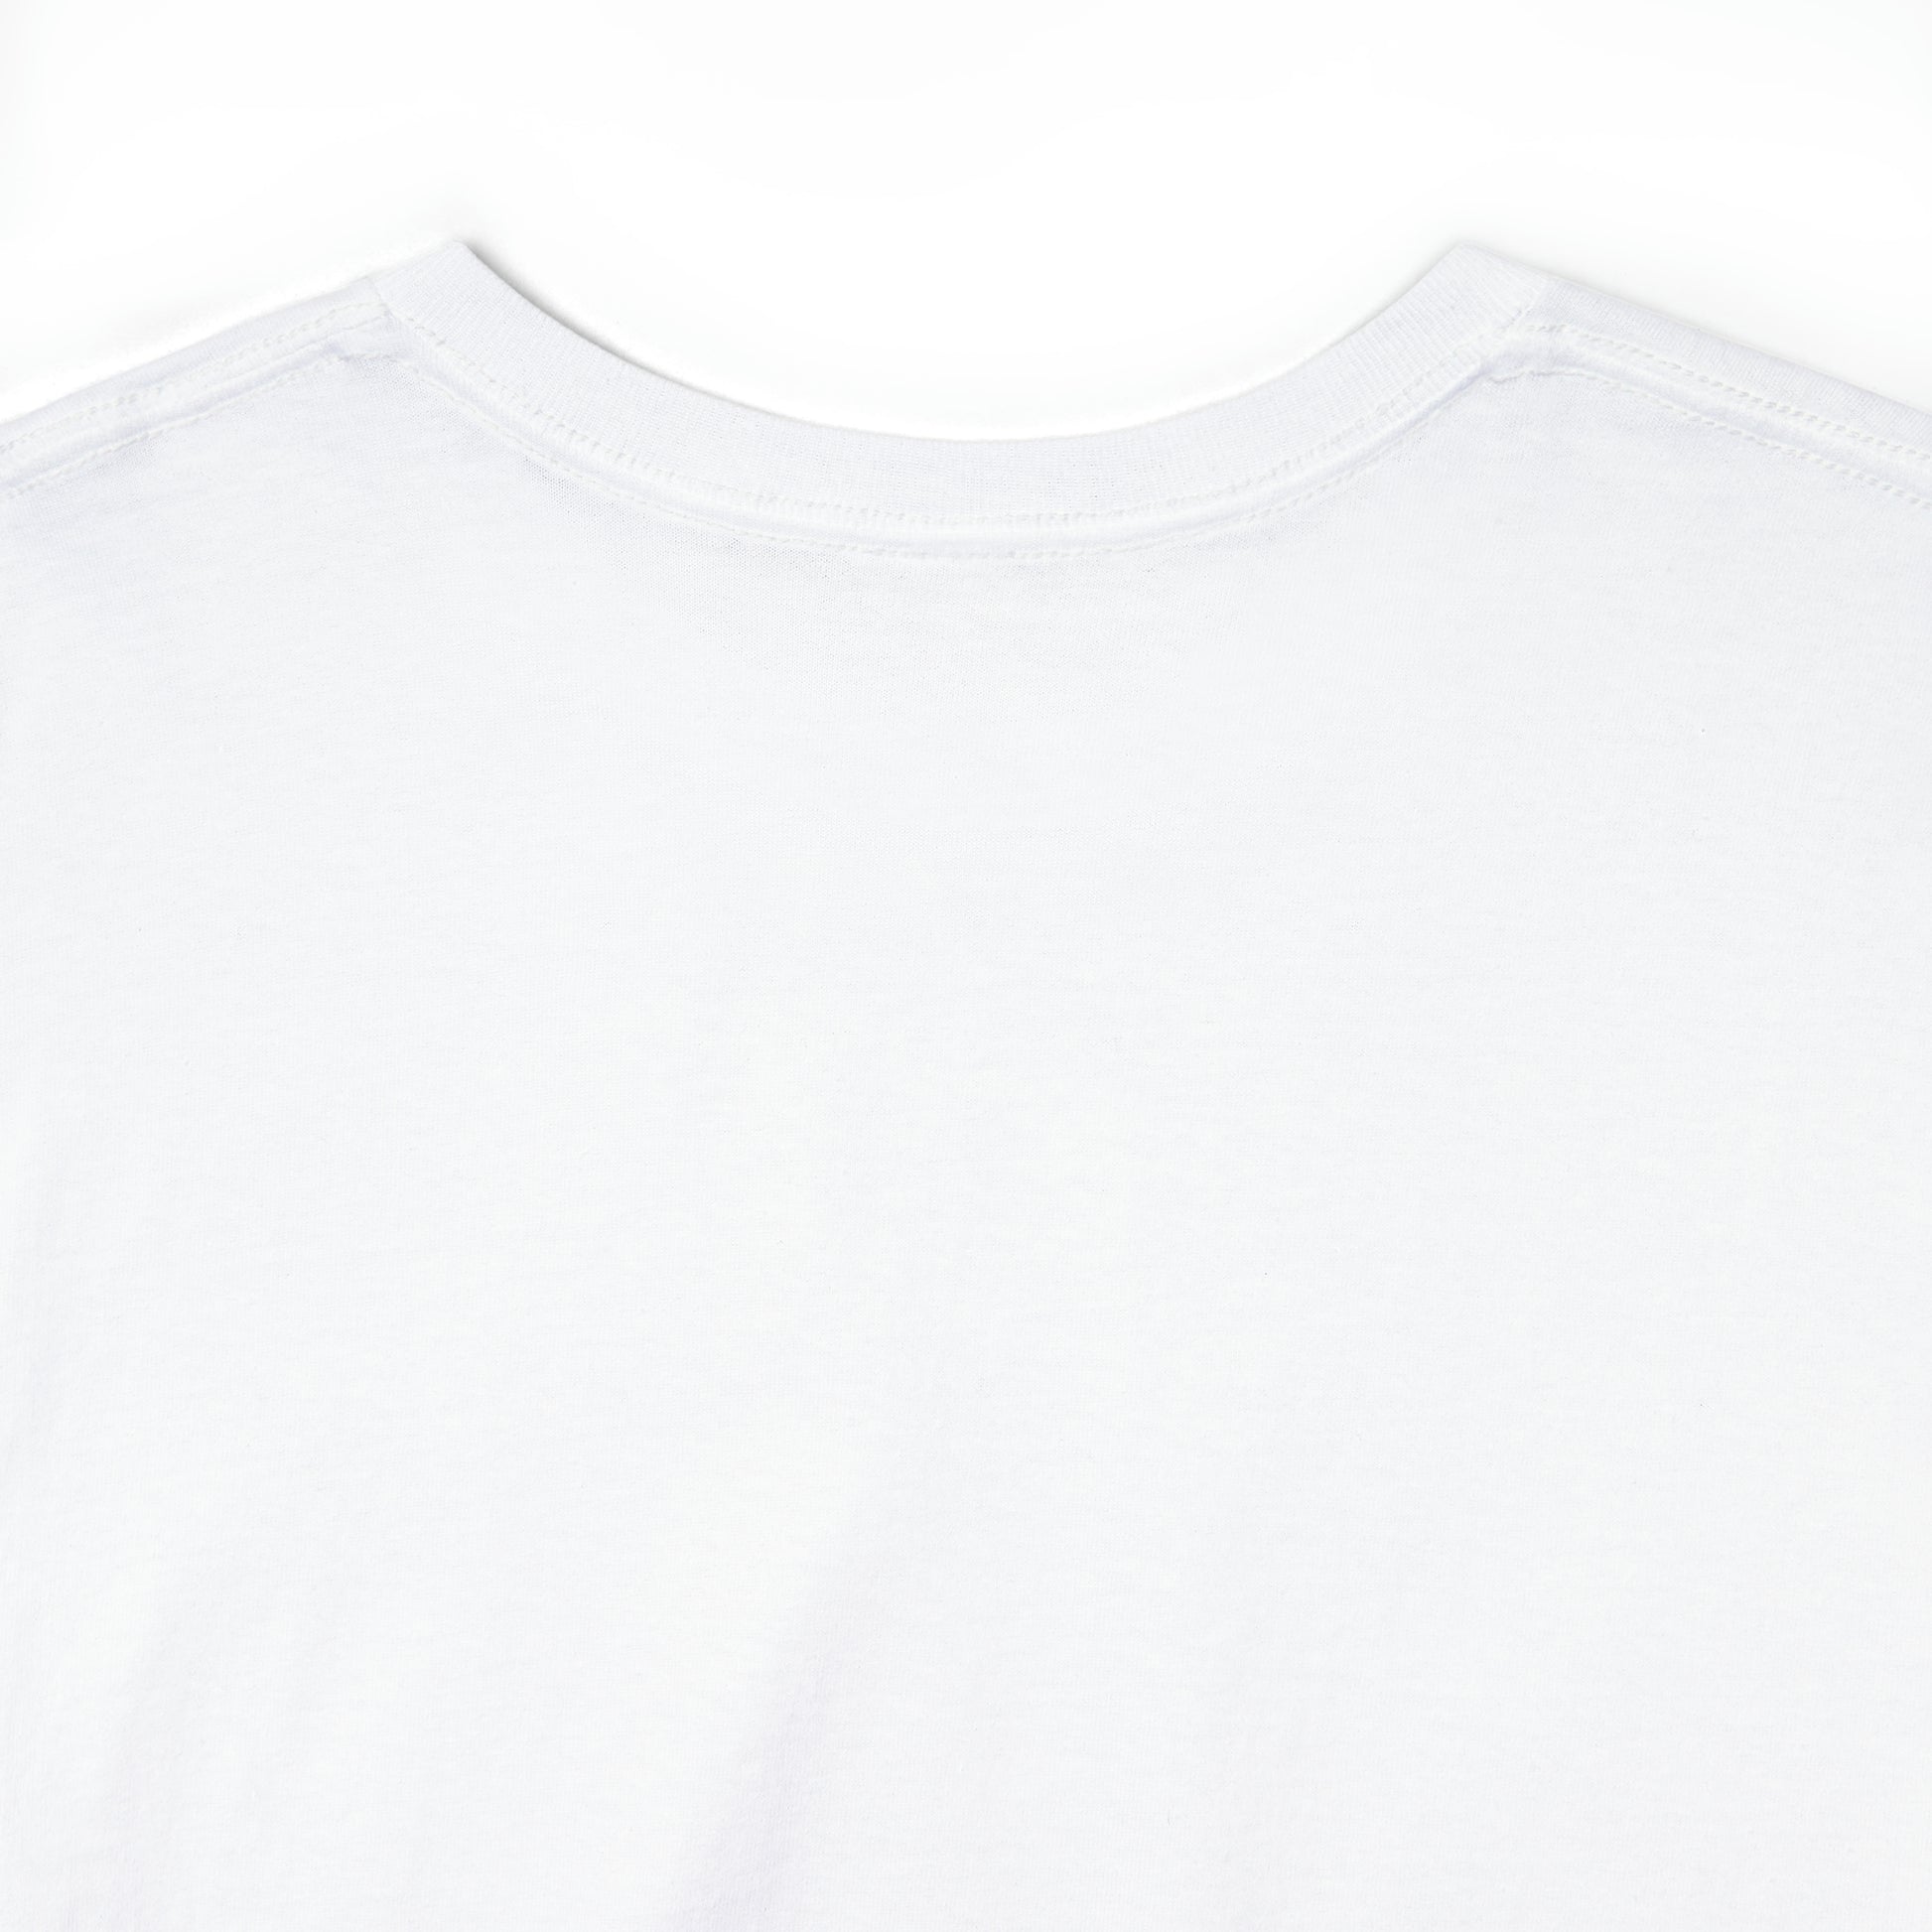 Back neck view of the White t-shirt